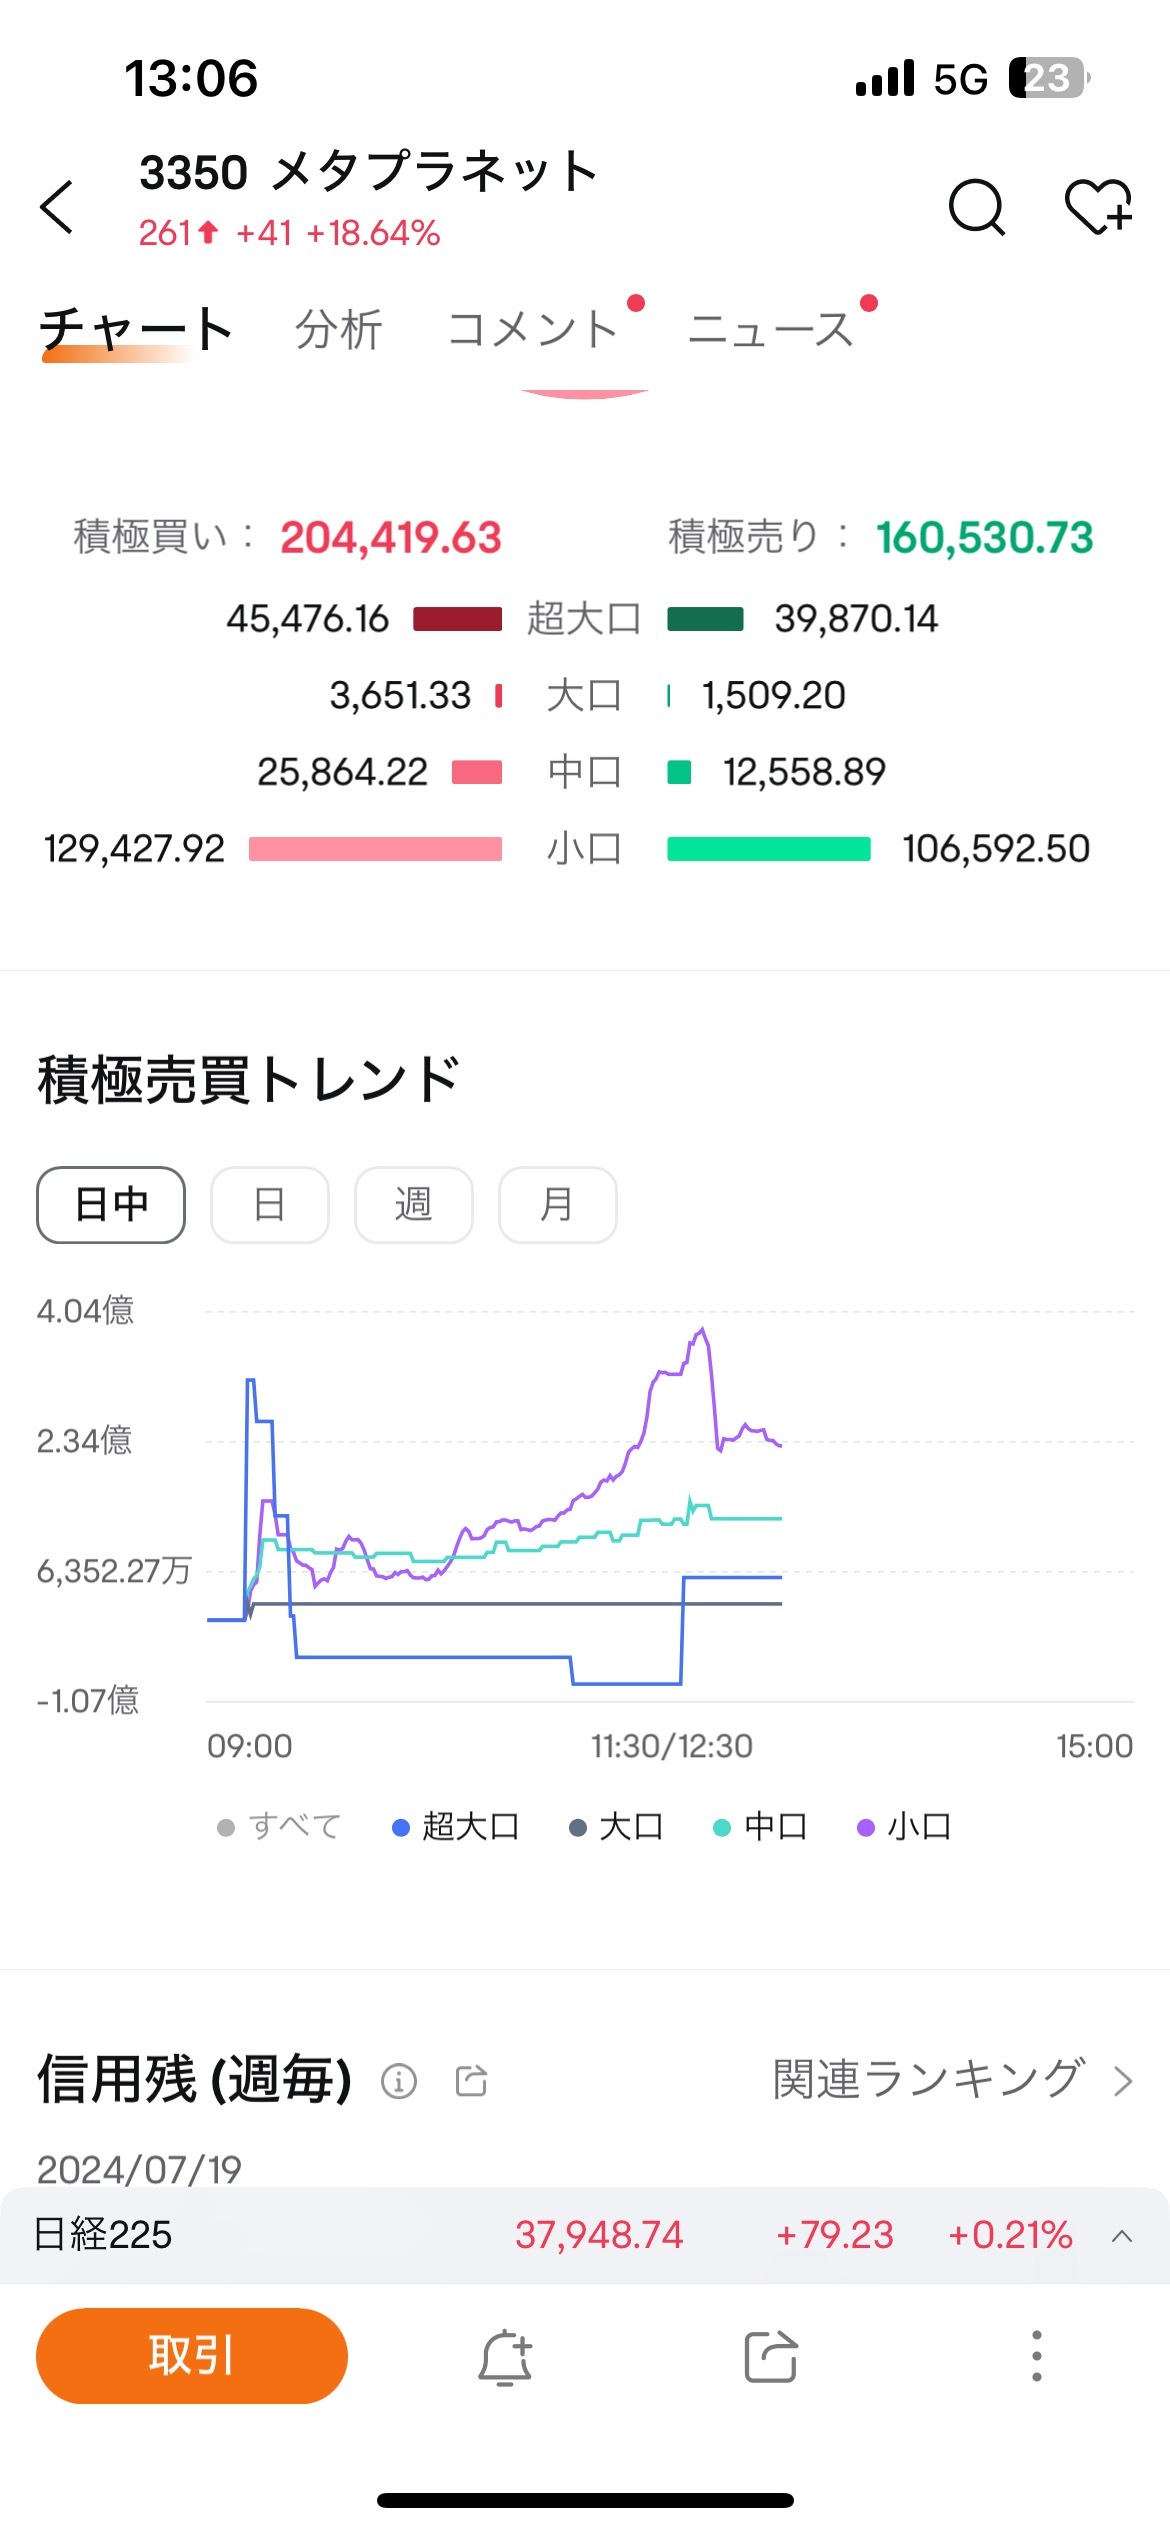 $Metaplanet (3350.JP)$ this feeling... everyone, be careful A long time ago, the same thing happened at Forside. The first stop in the morning was 735 yen high,...